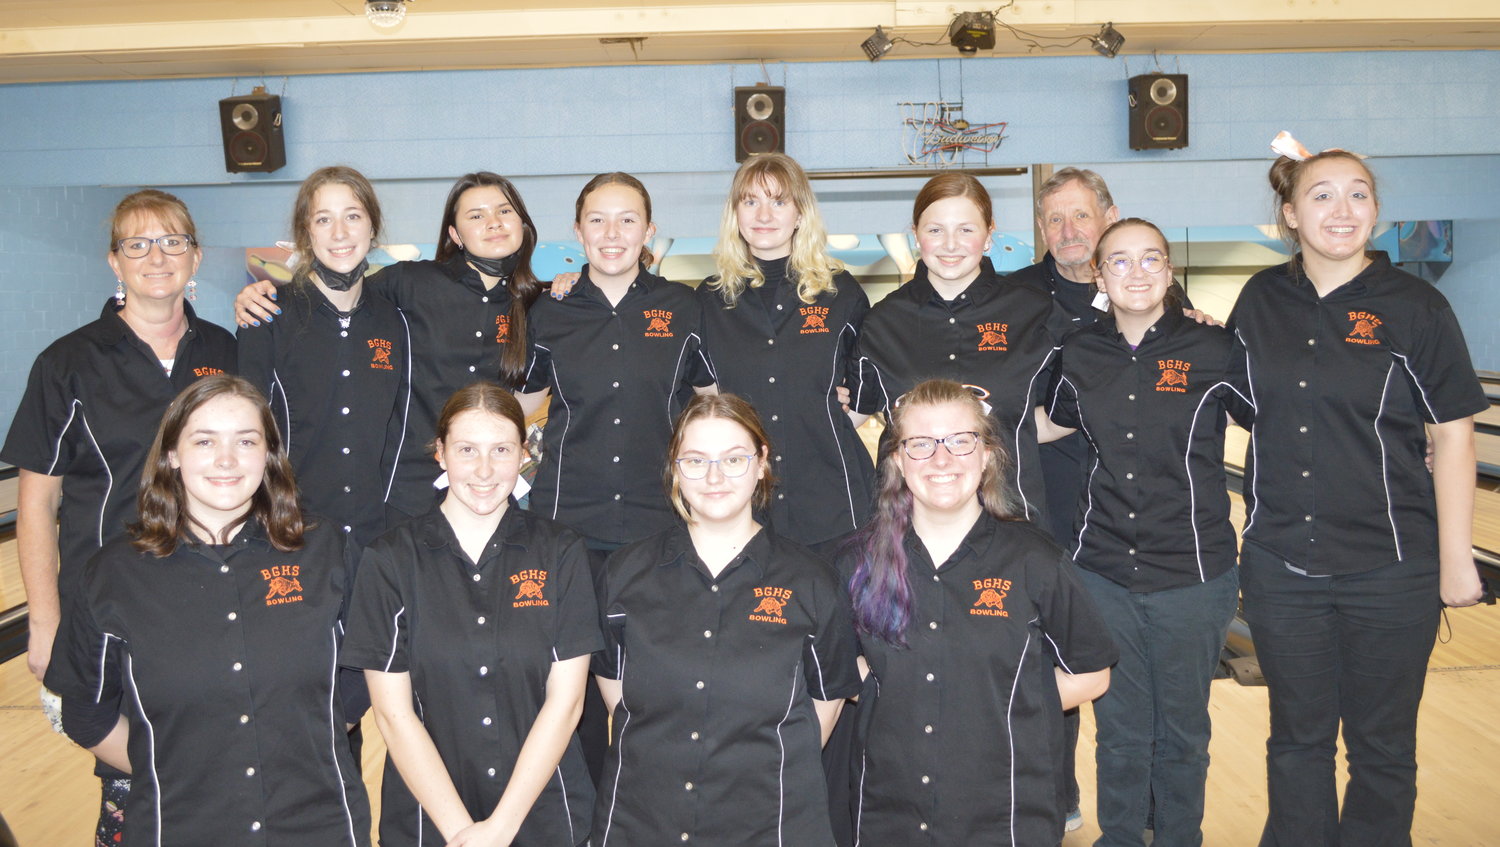 The Battle Ground High School bowling team is pictured.